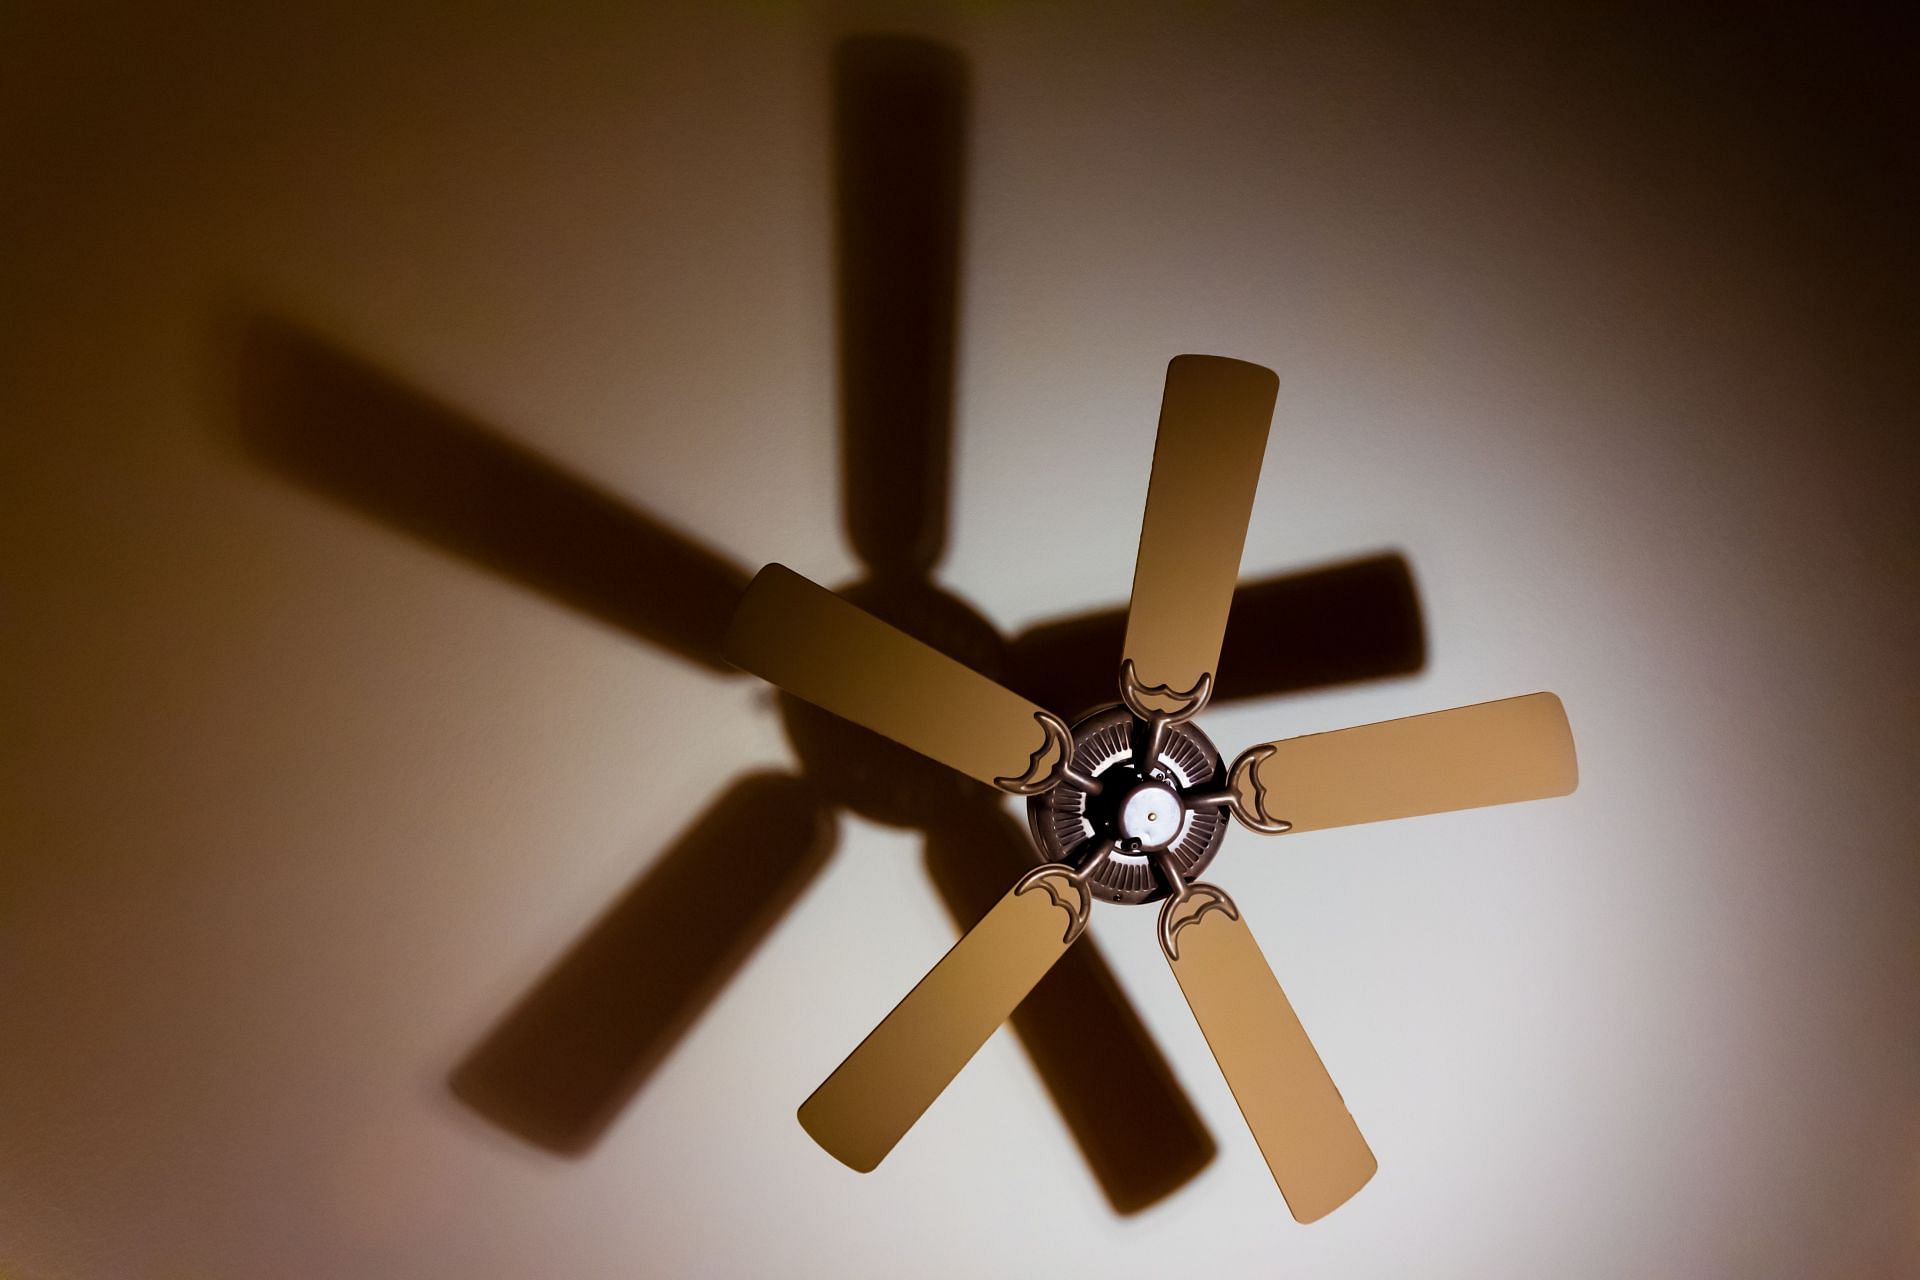 Fans for white noise are effective for deep sleep (Image via Unsplash/ Jason Anderson)